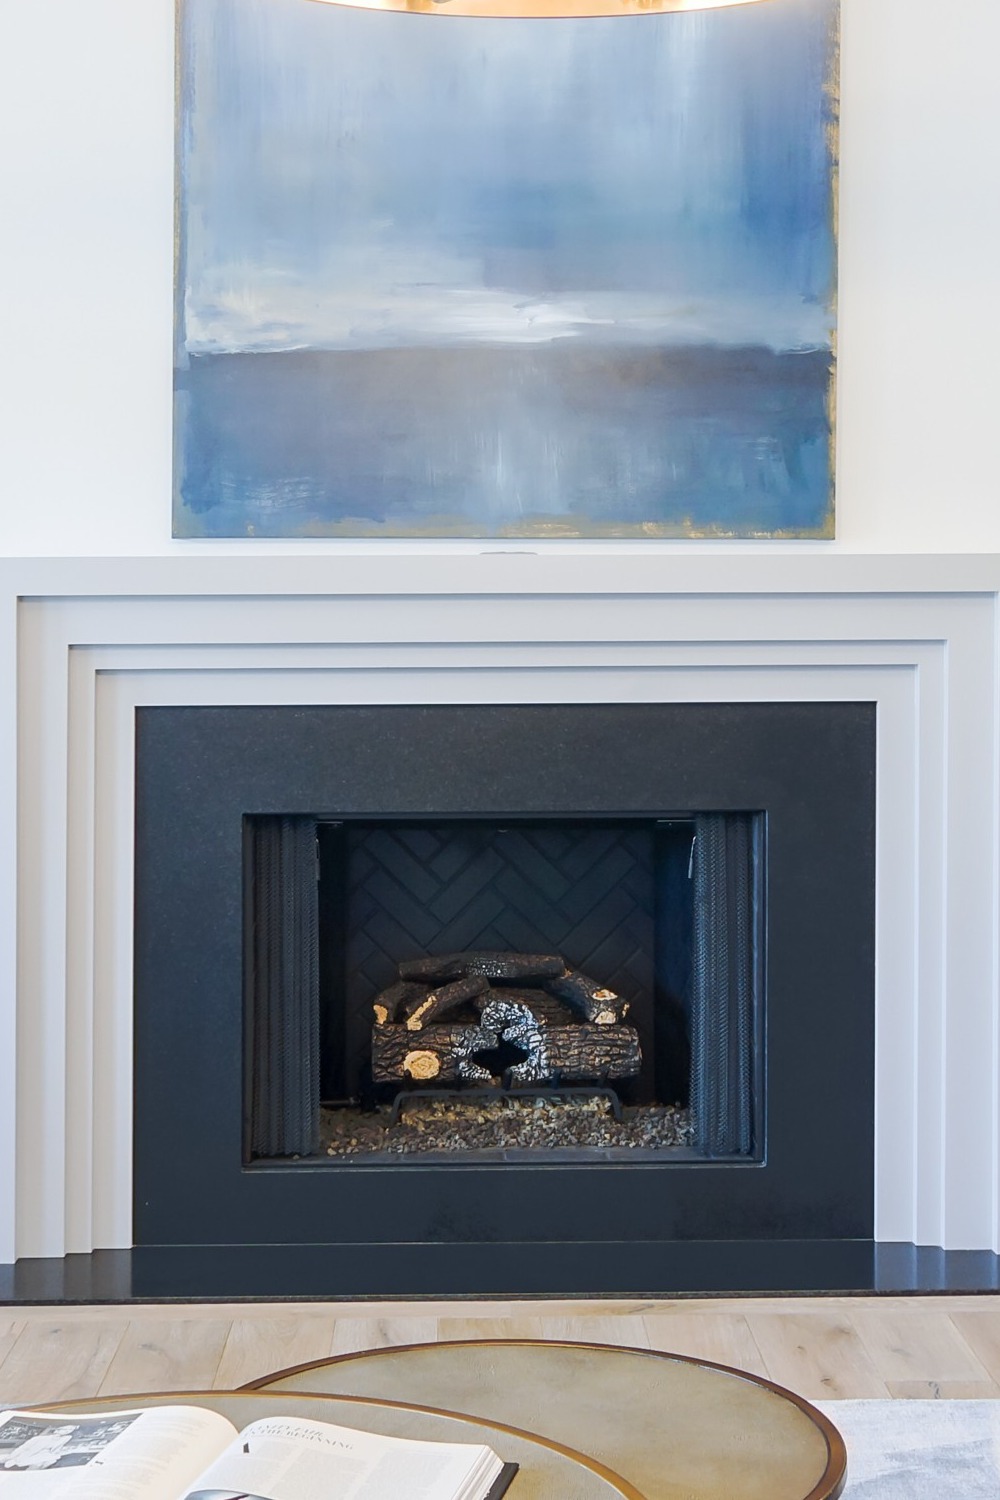 Absolute Black Granite Surrounds Layered Mantel Fireplace Light Wood Floor White Wall